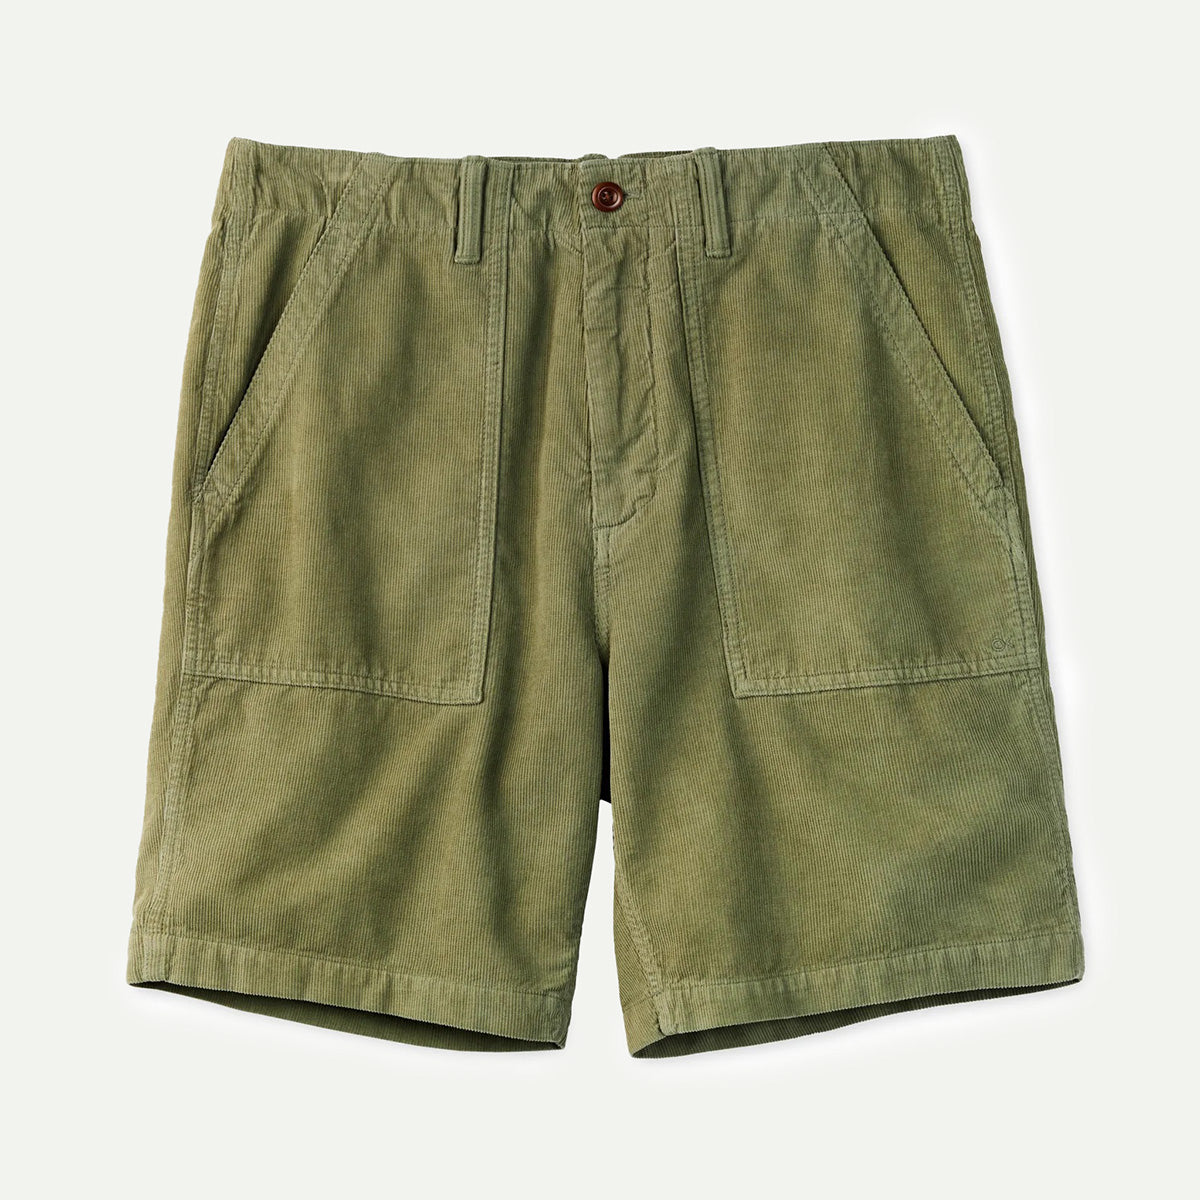 Outerknown Bay Leaf Seventyseven Cord Utility Short